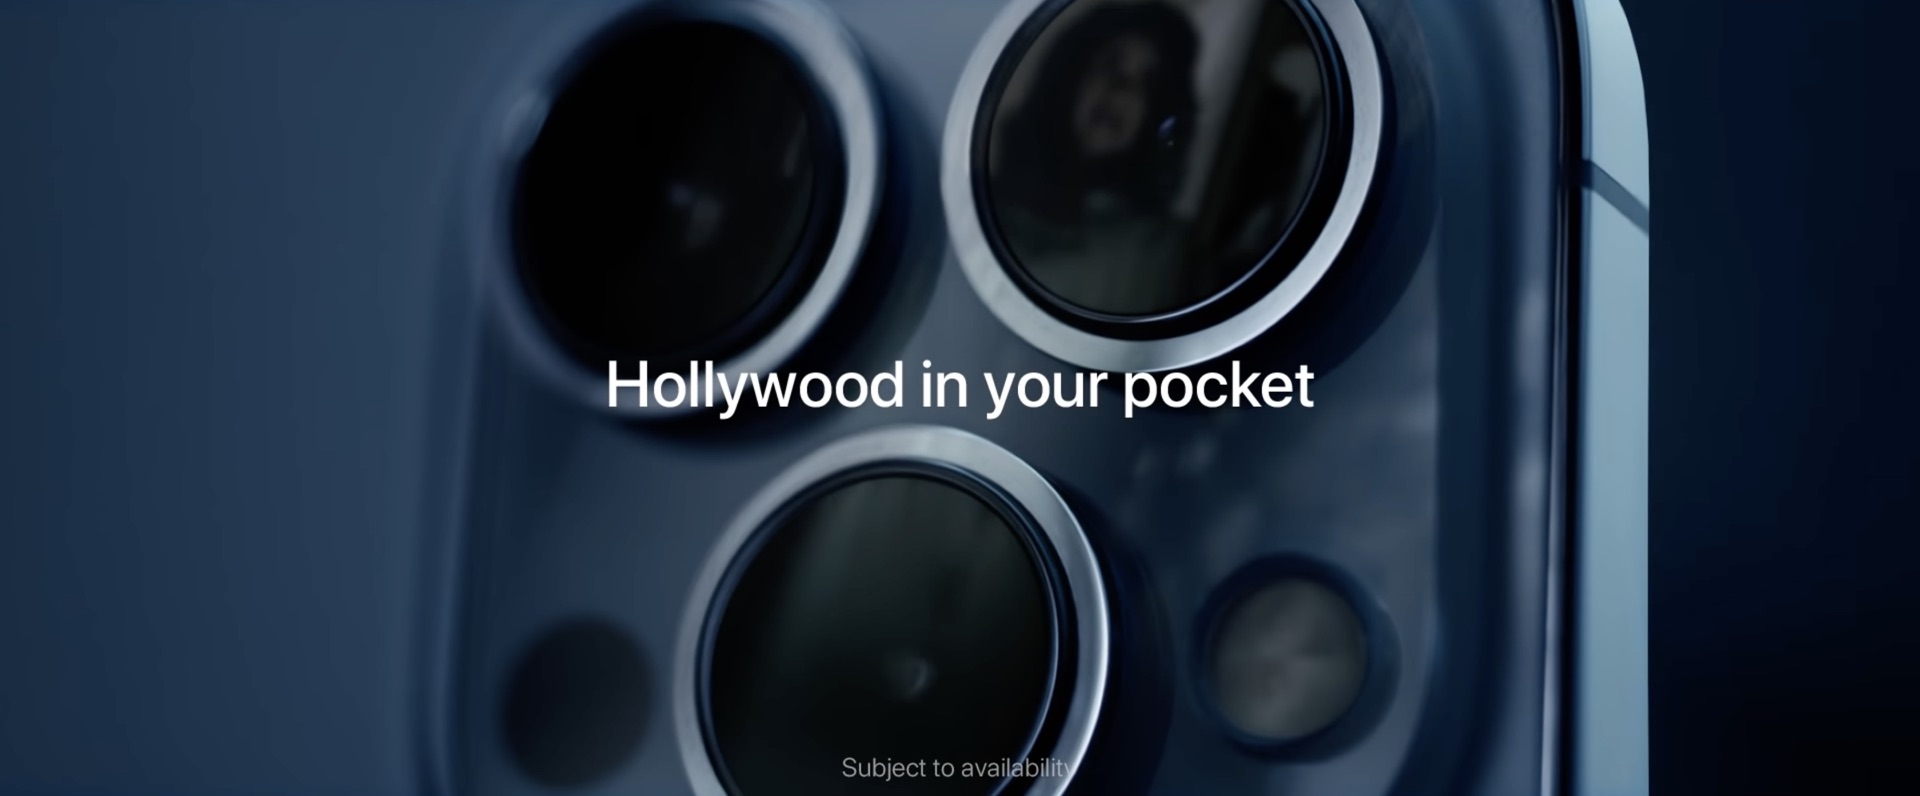 A still from Apple's ad promoting better low-light sensitivity on the iPhone 13 Pro camera. the image shows the triple-leans rear camera system with a woman's reflection in one of the lenses and the tagline "Hollywood in your pocket"